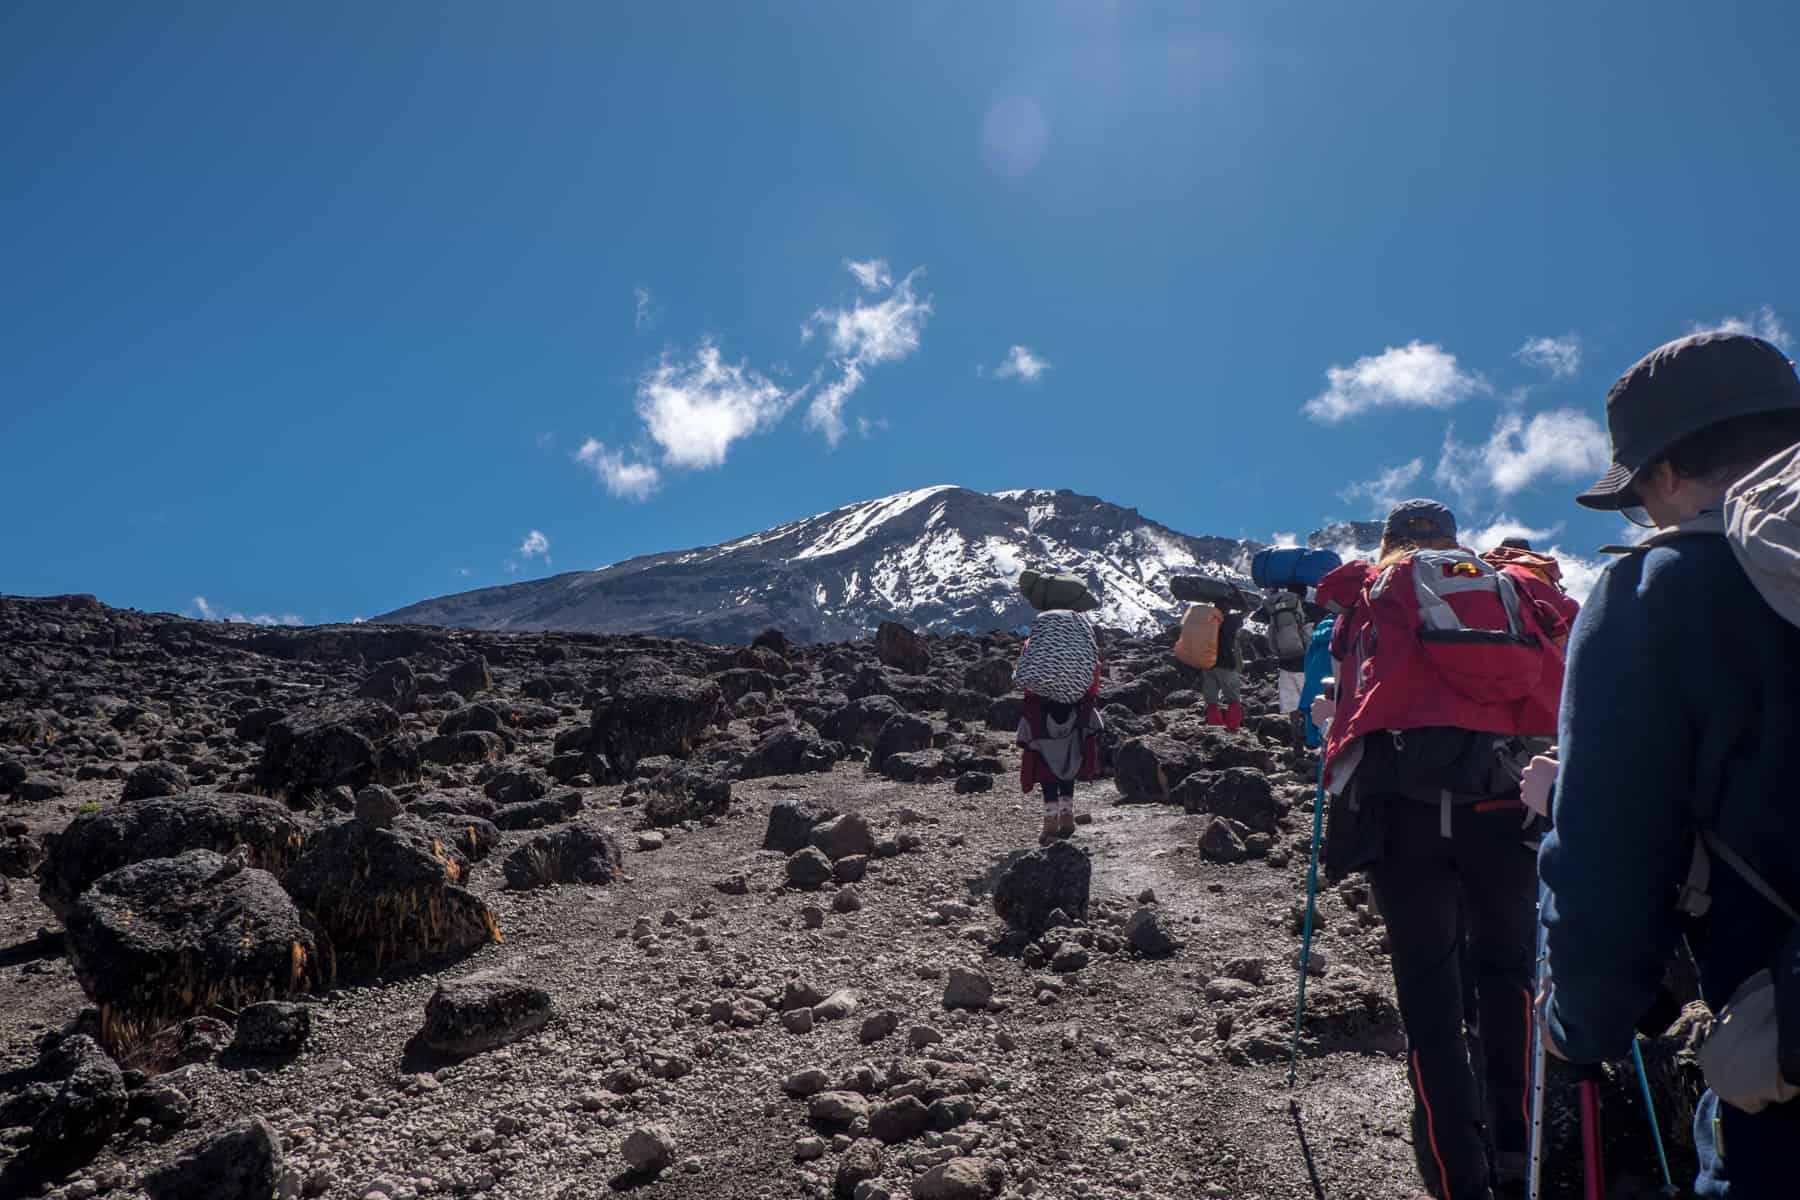 A line of trekkers walk on a dry, rocky pathway towards Mount Kilimanjaro that stands in the distance.